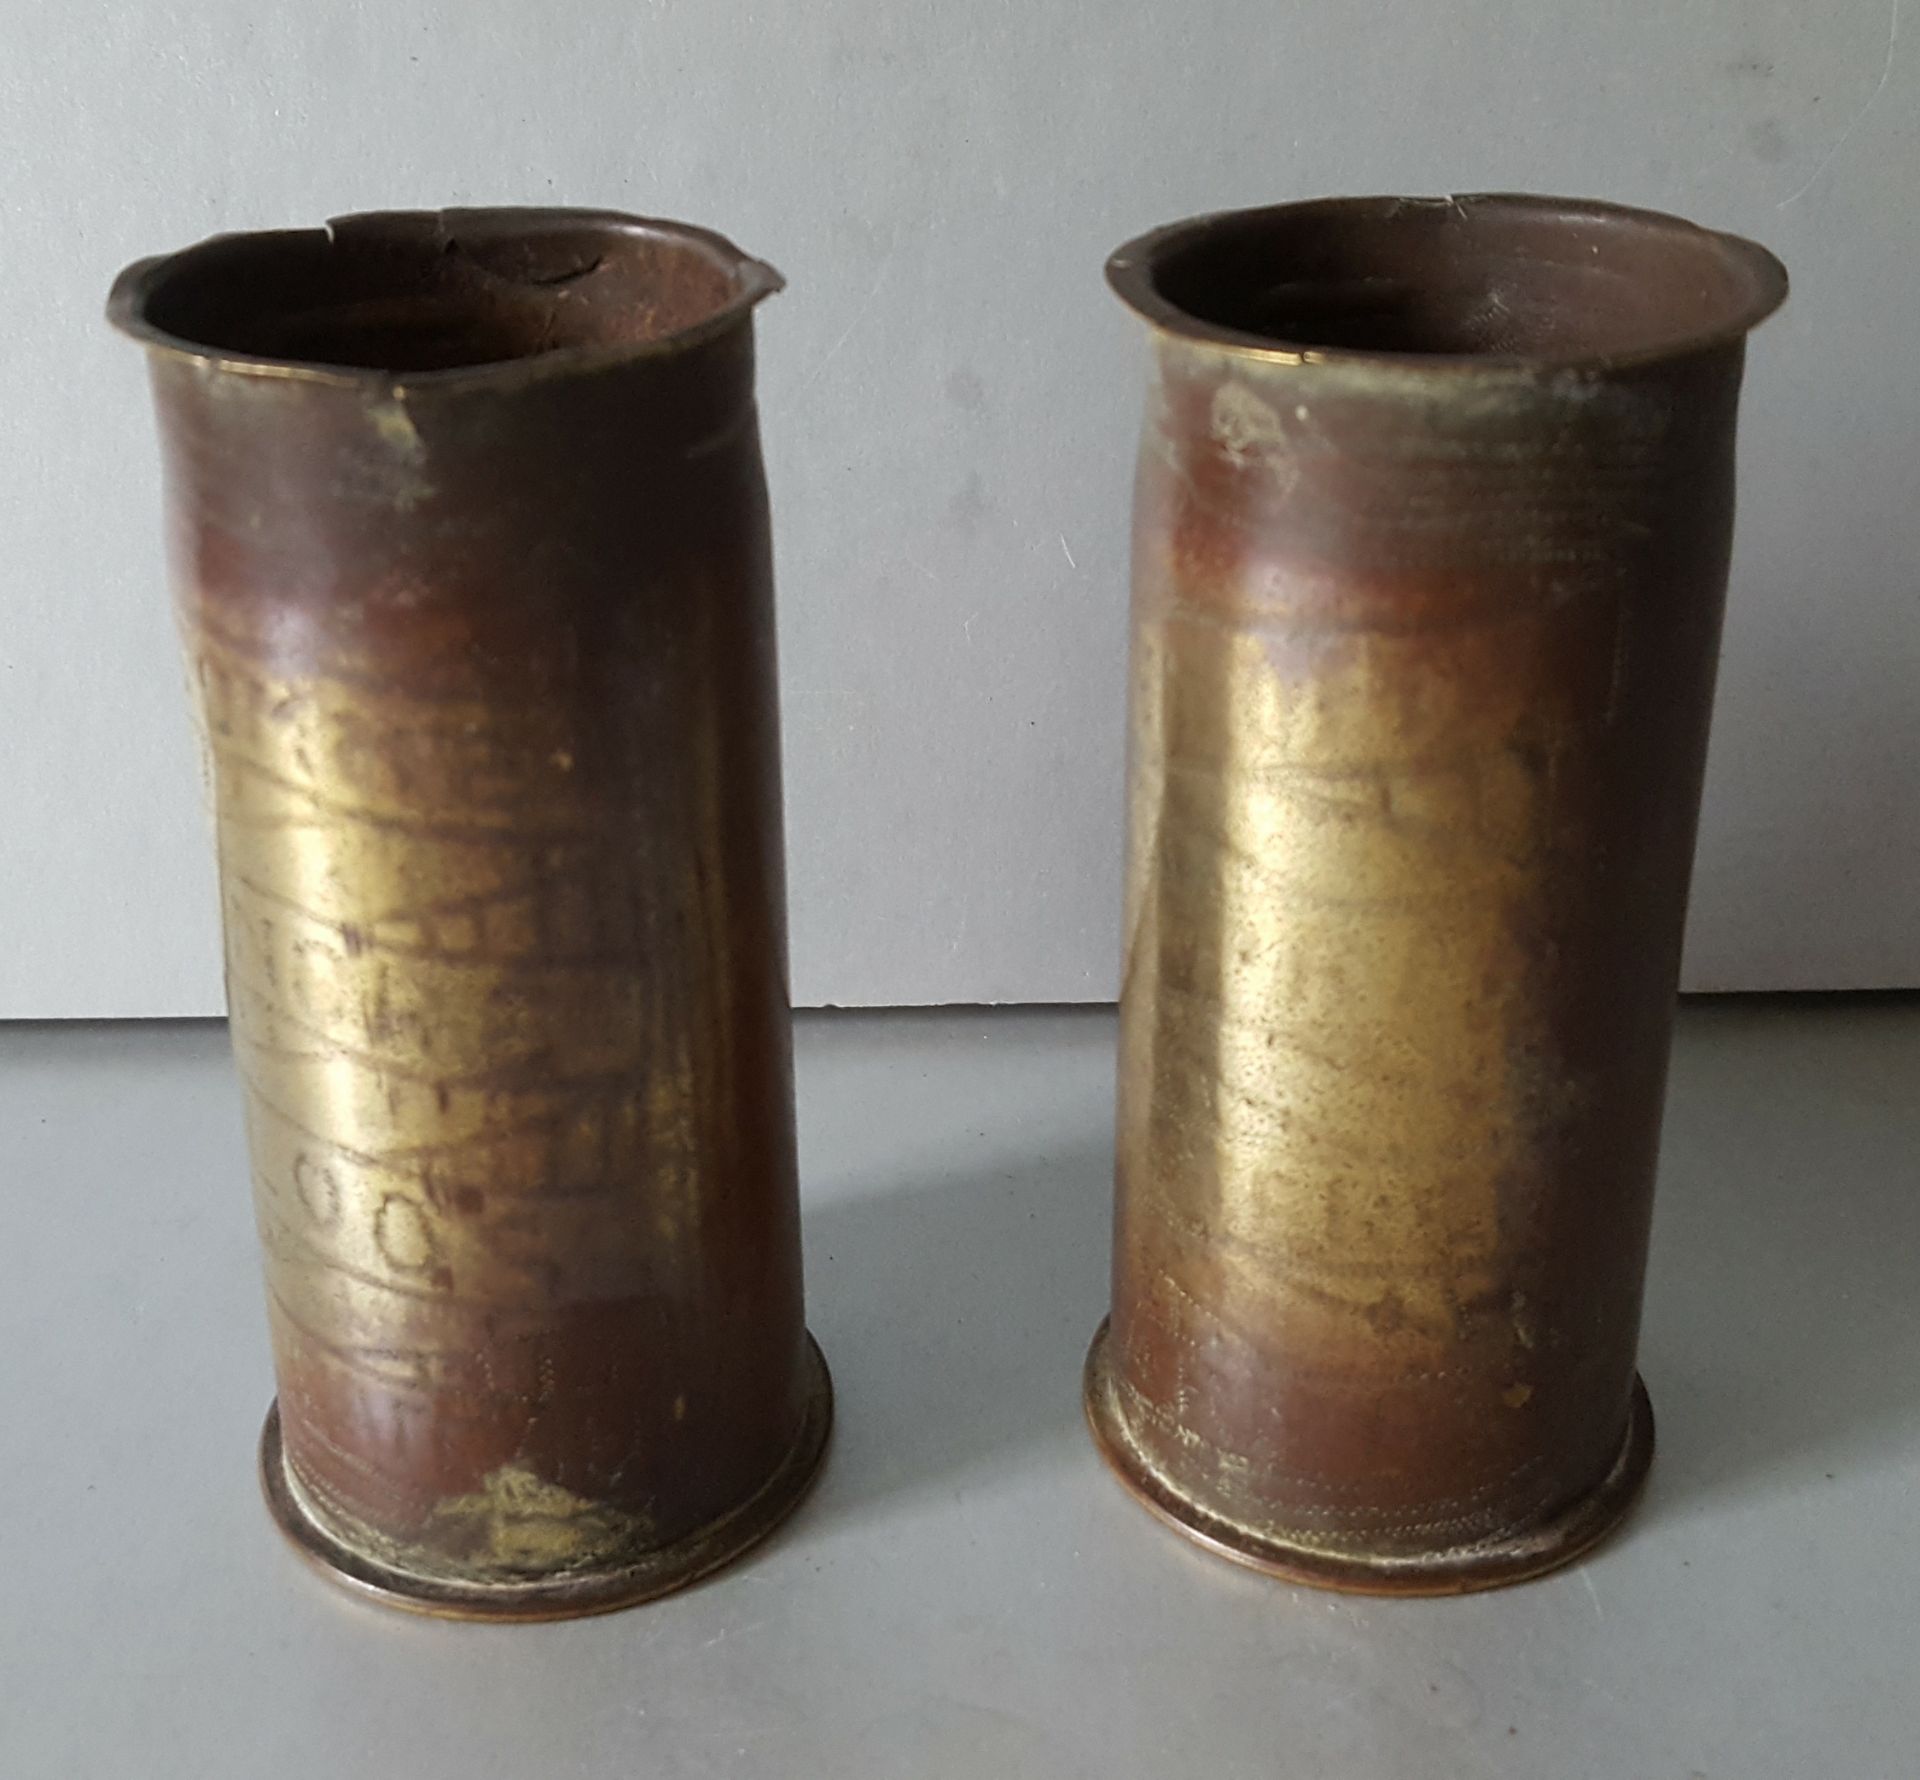 Trench Art Sell Casings German Karlsruhe 37mm Shells. Inscribed A W Potts & A H Potts. These laos